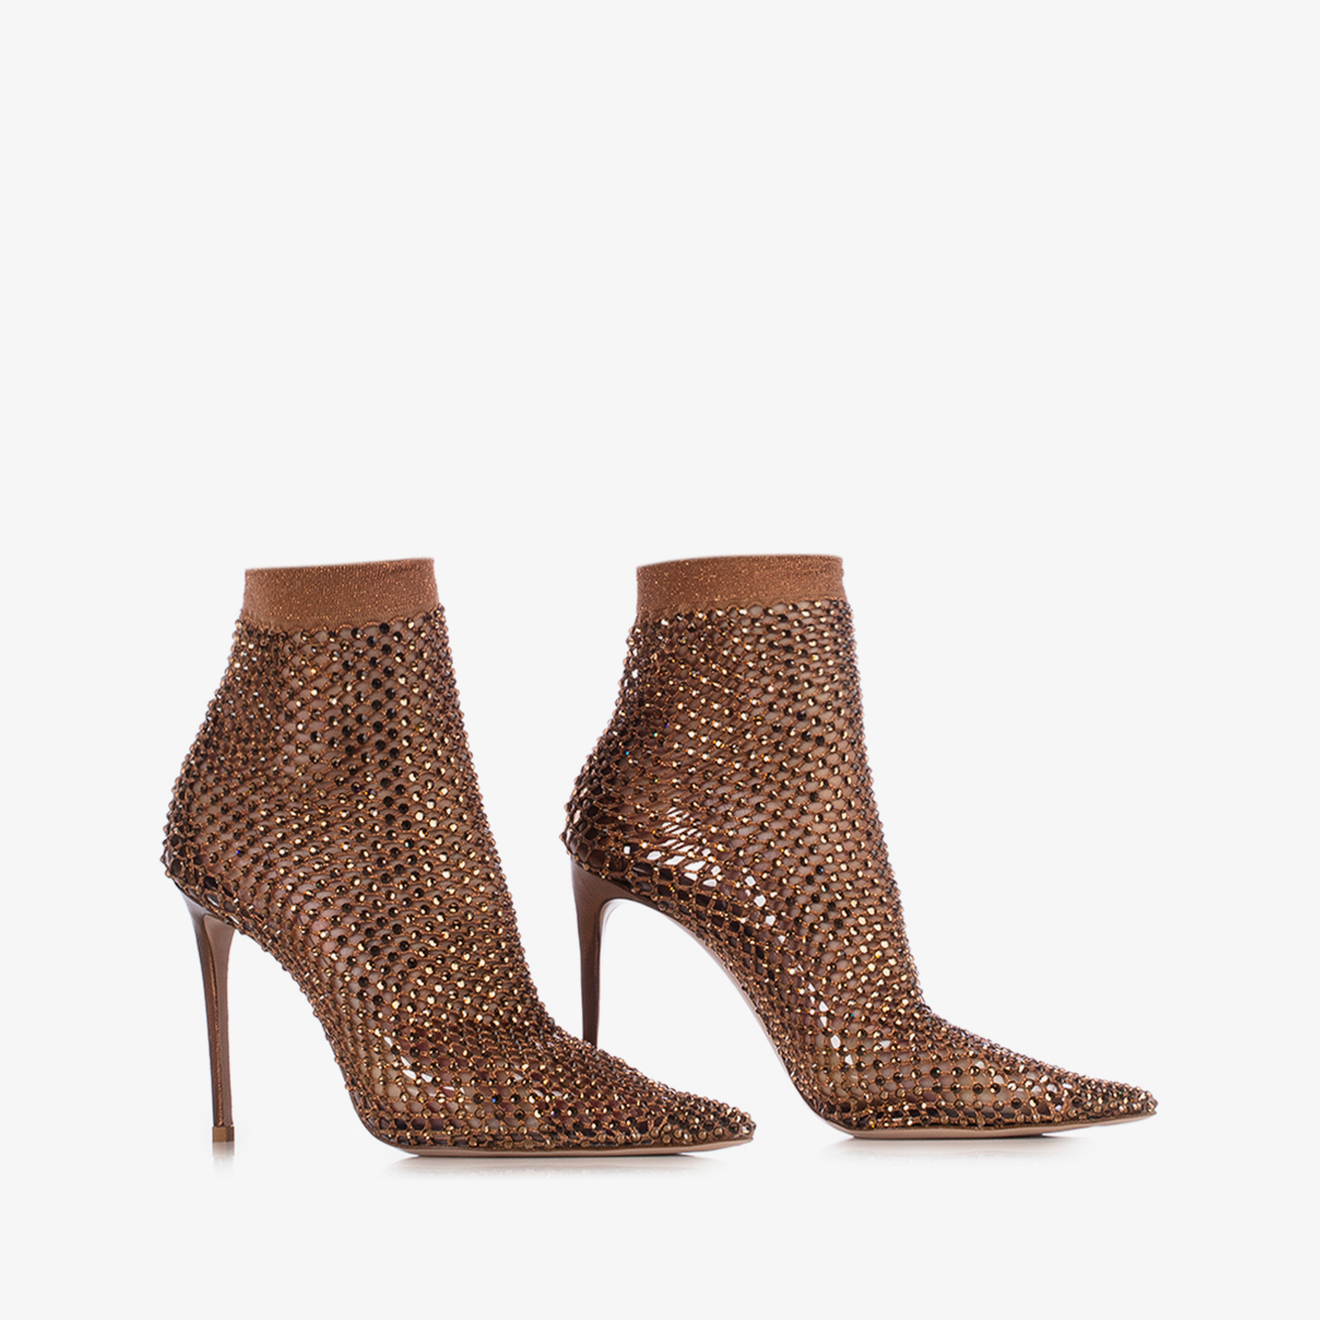 GILDA ANKLE BOOT 100 mm - Le Silla | Official Online Store